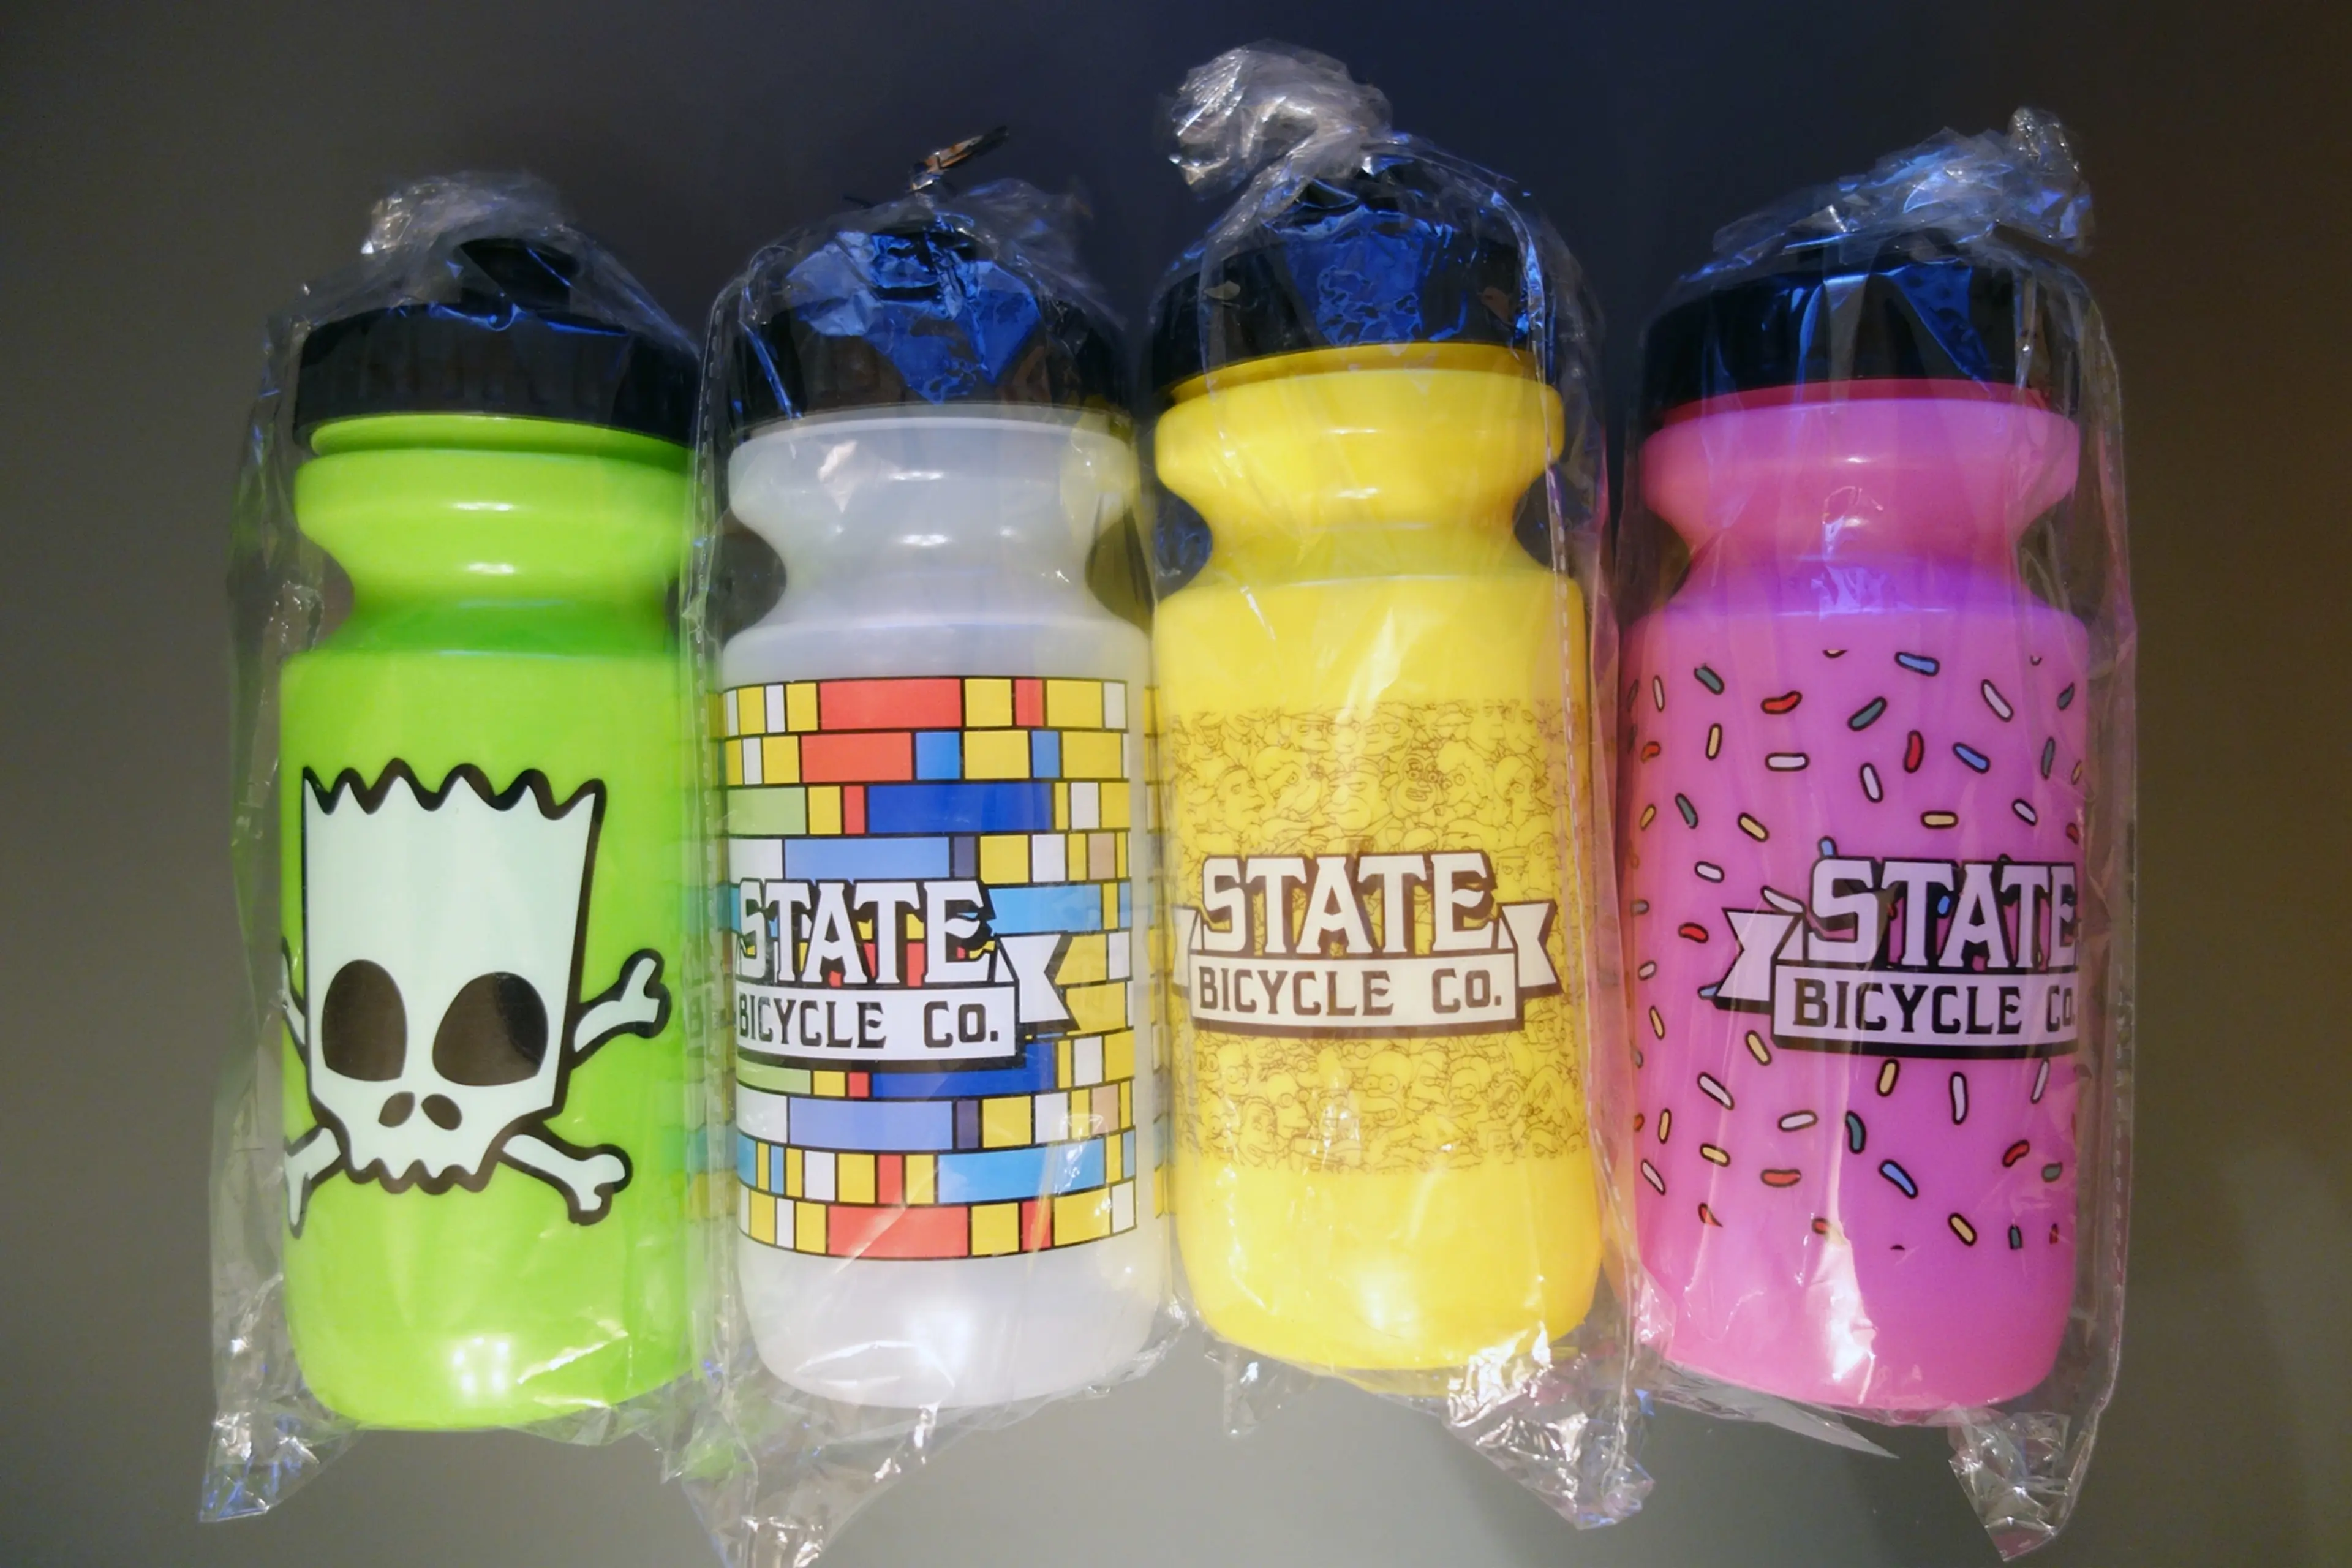 5. THE SIMPSONS X STATE BICYCLE CO. BOTTLE